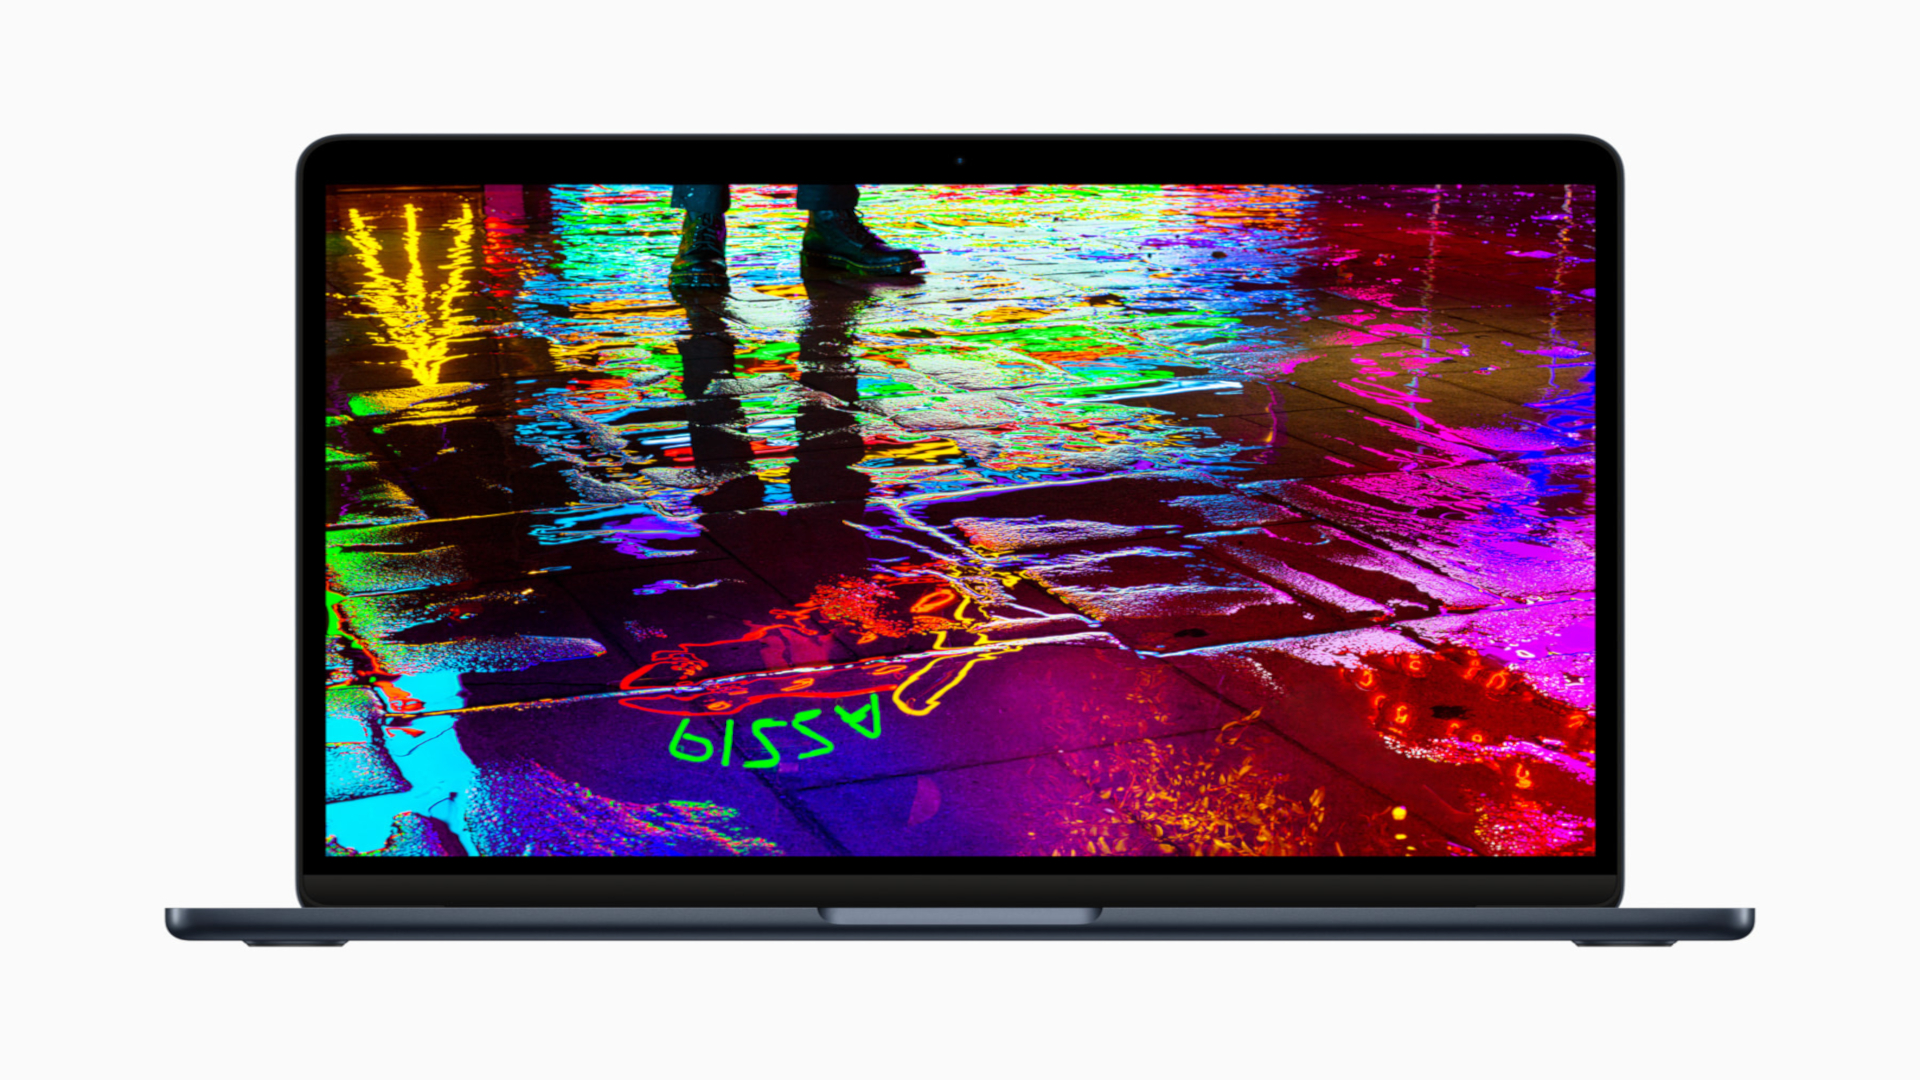 best laptops apple mackbook air m2 an image of the macbook m2 open with a neon cityscape image reflected in a puddle